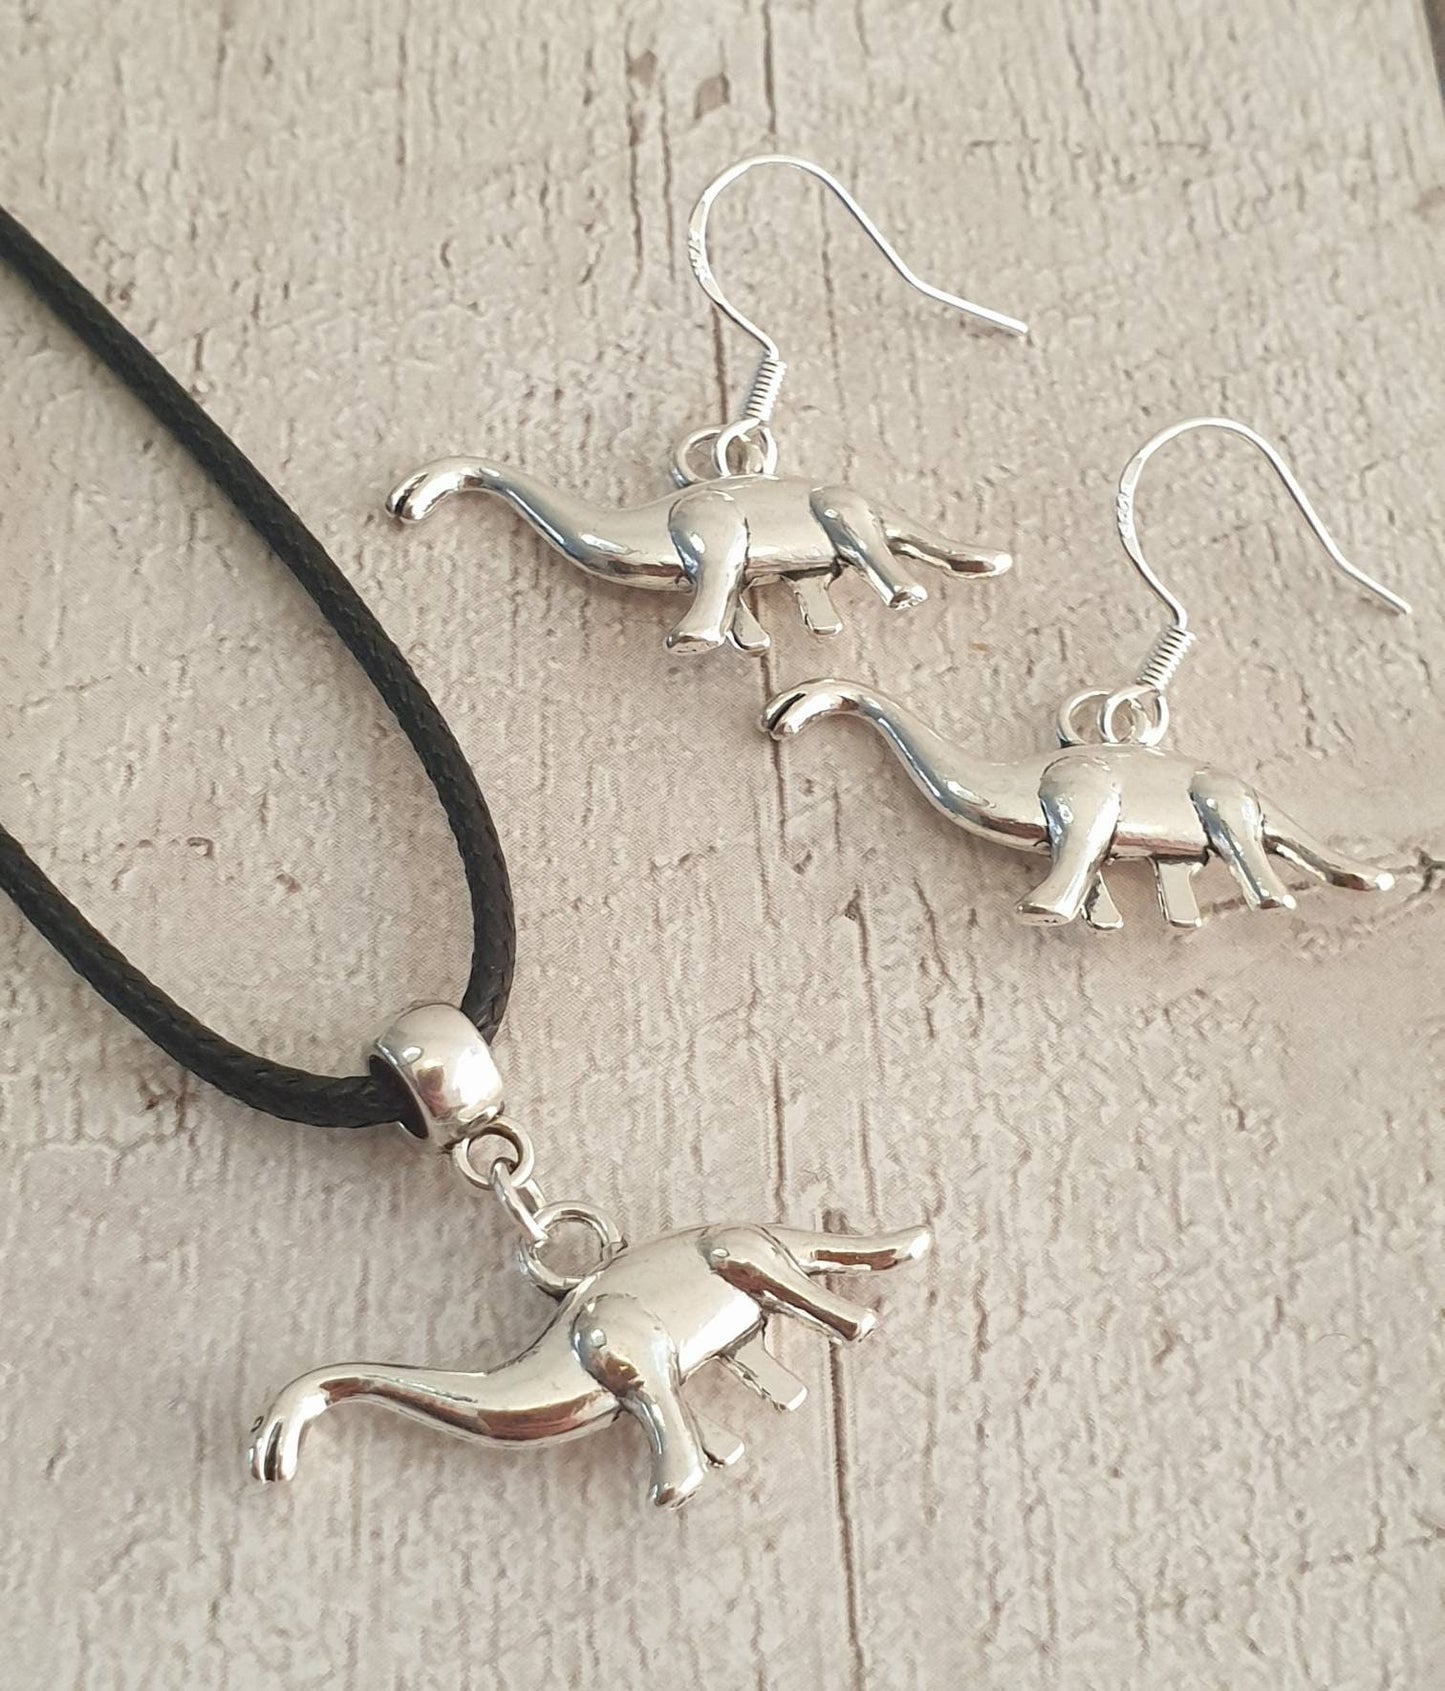 Handmade Antique Silver Dinosaur Charm Jewellery Set, Dangly Earring And Necklace Set In Gift Bag, Cord Or Chain Option - Premium  from Etsy - Just £8.99! Shop now at Uniquely Holt